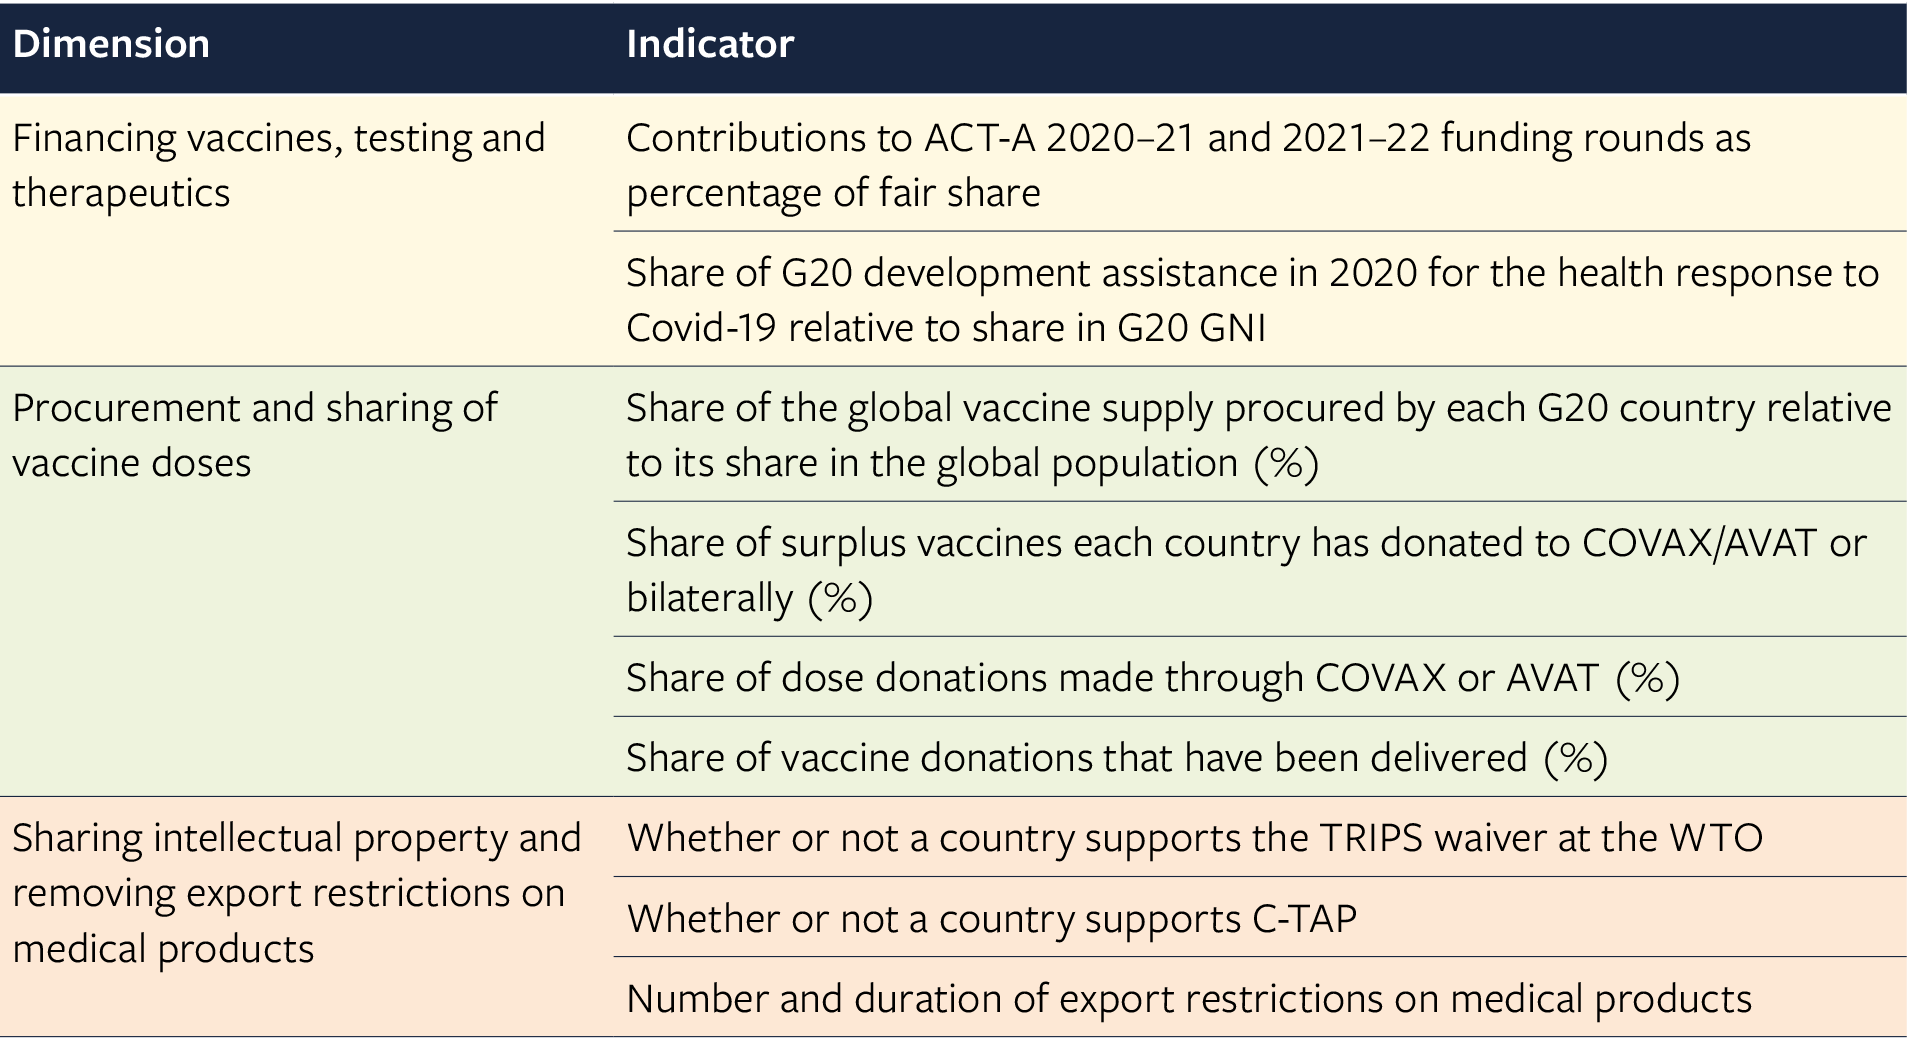 Table 1: Dimensions and indicators used in the G20 Covid-19 Global Health Equity Index